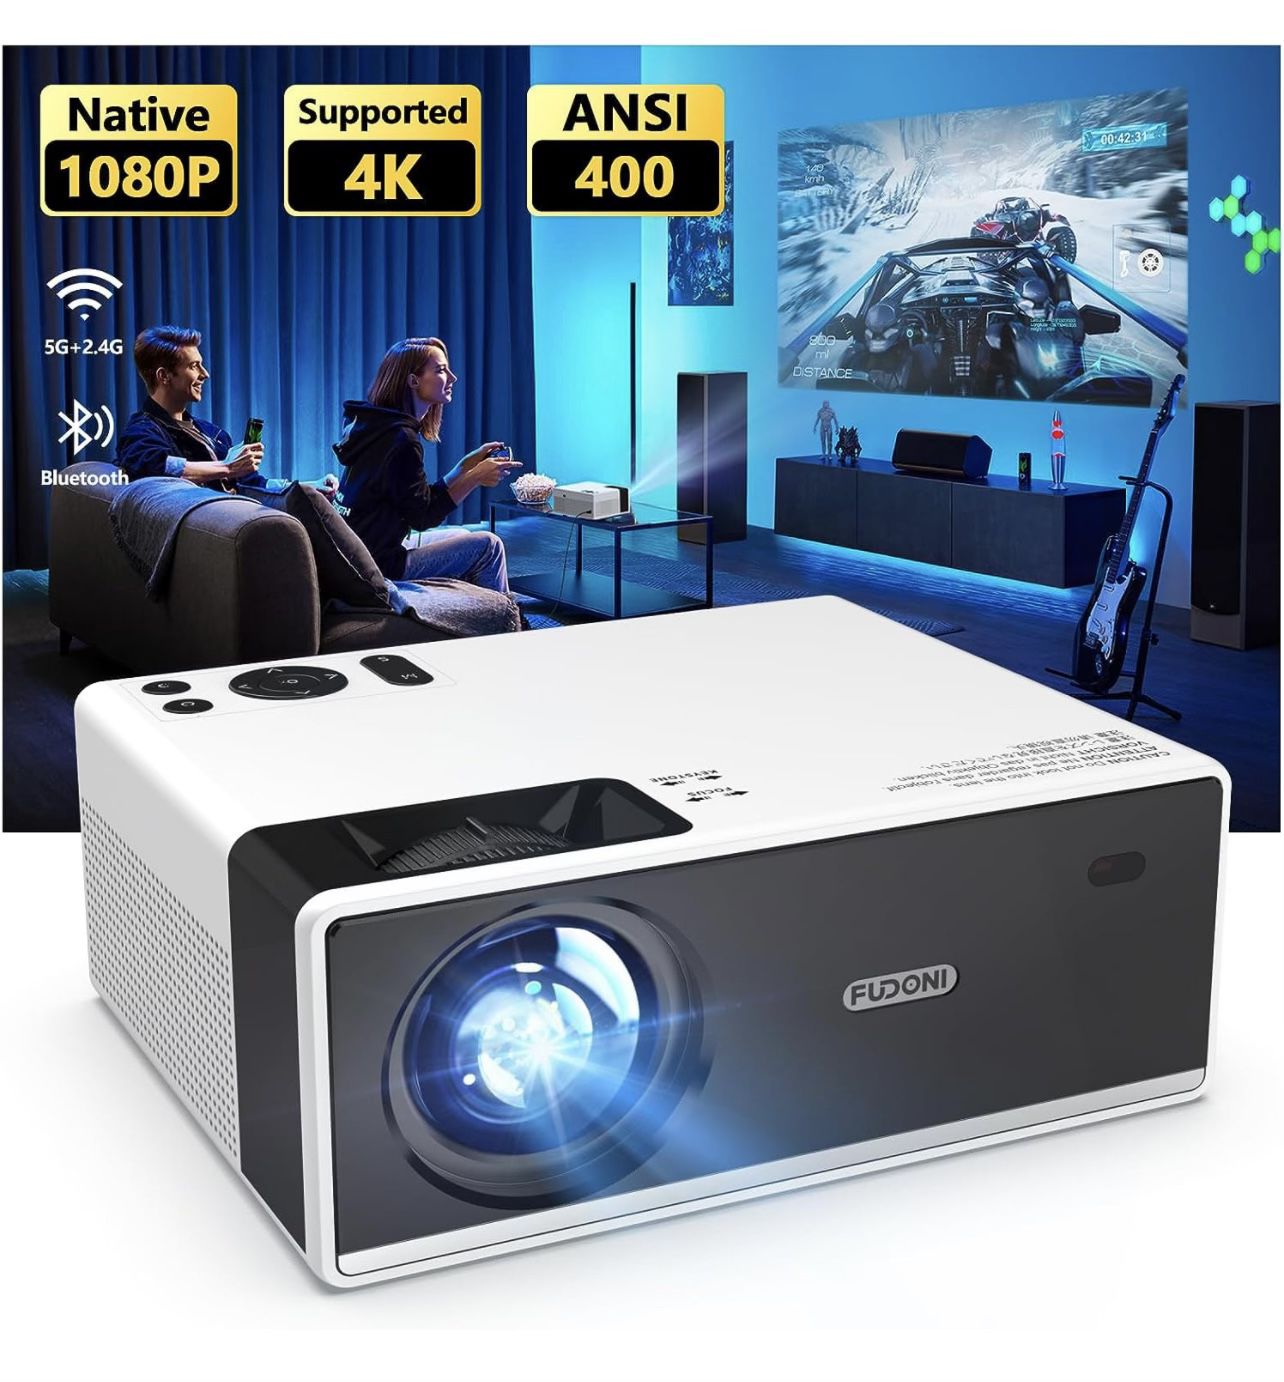 BRAND NEW IN BOX 4K Support Projector with WiFi and Bluetooth Outdoor Portable Mini Projector 